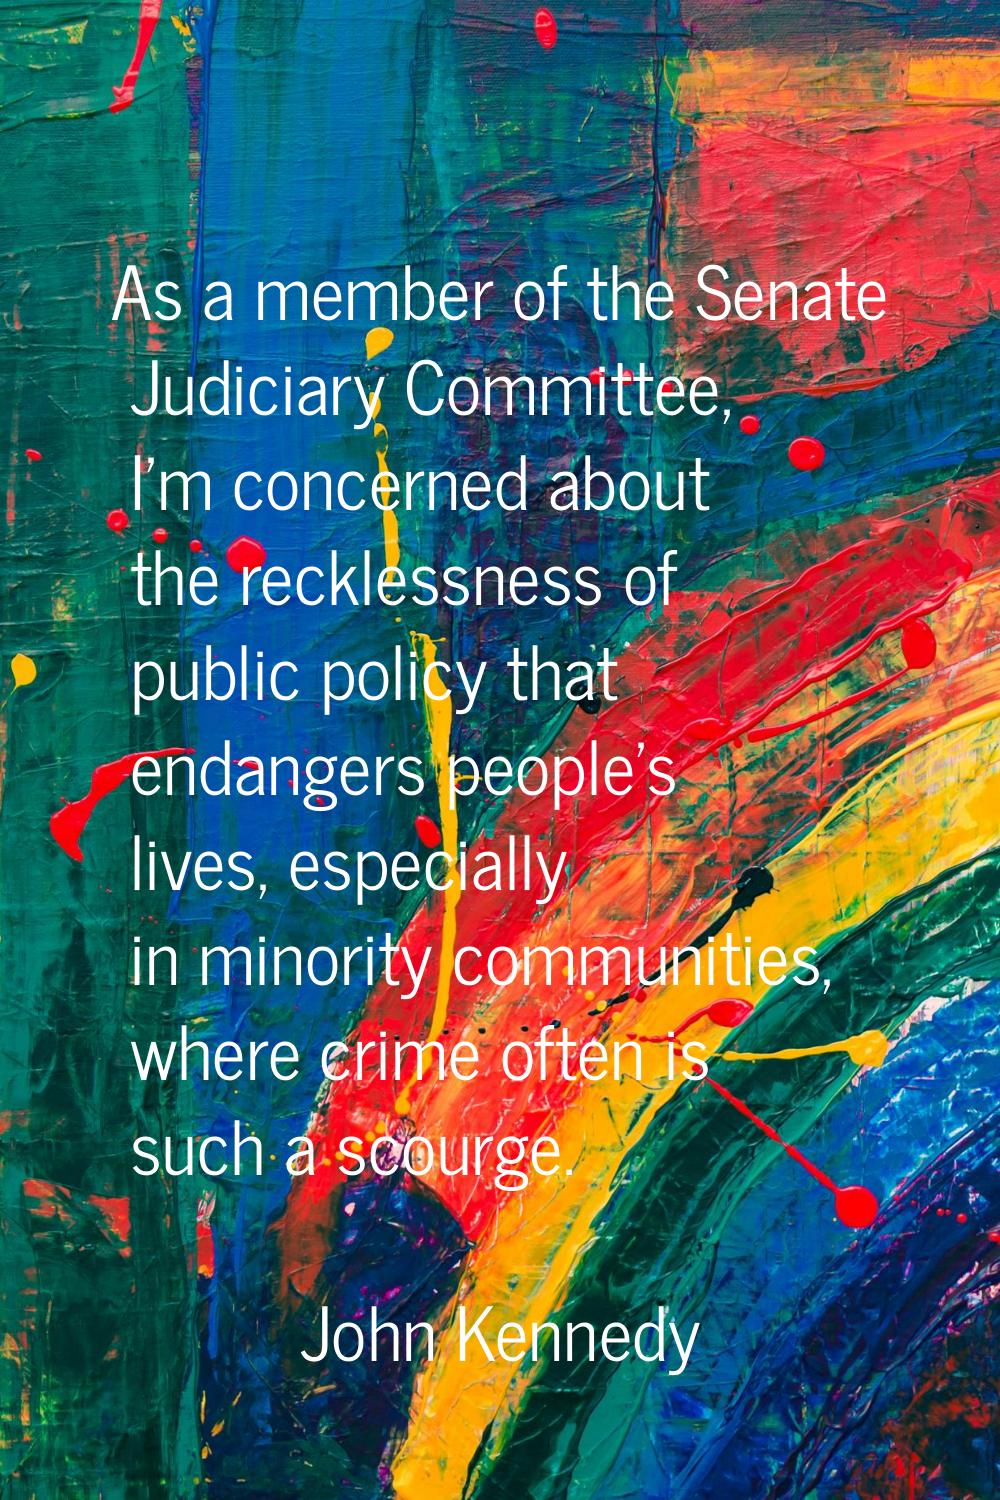 As a member of the Senate Judiciary Committee, I'm concerned about the recklessness of public polic